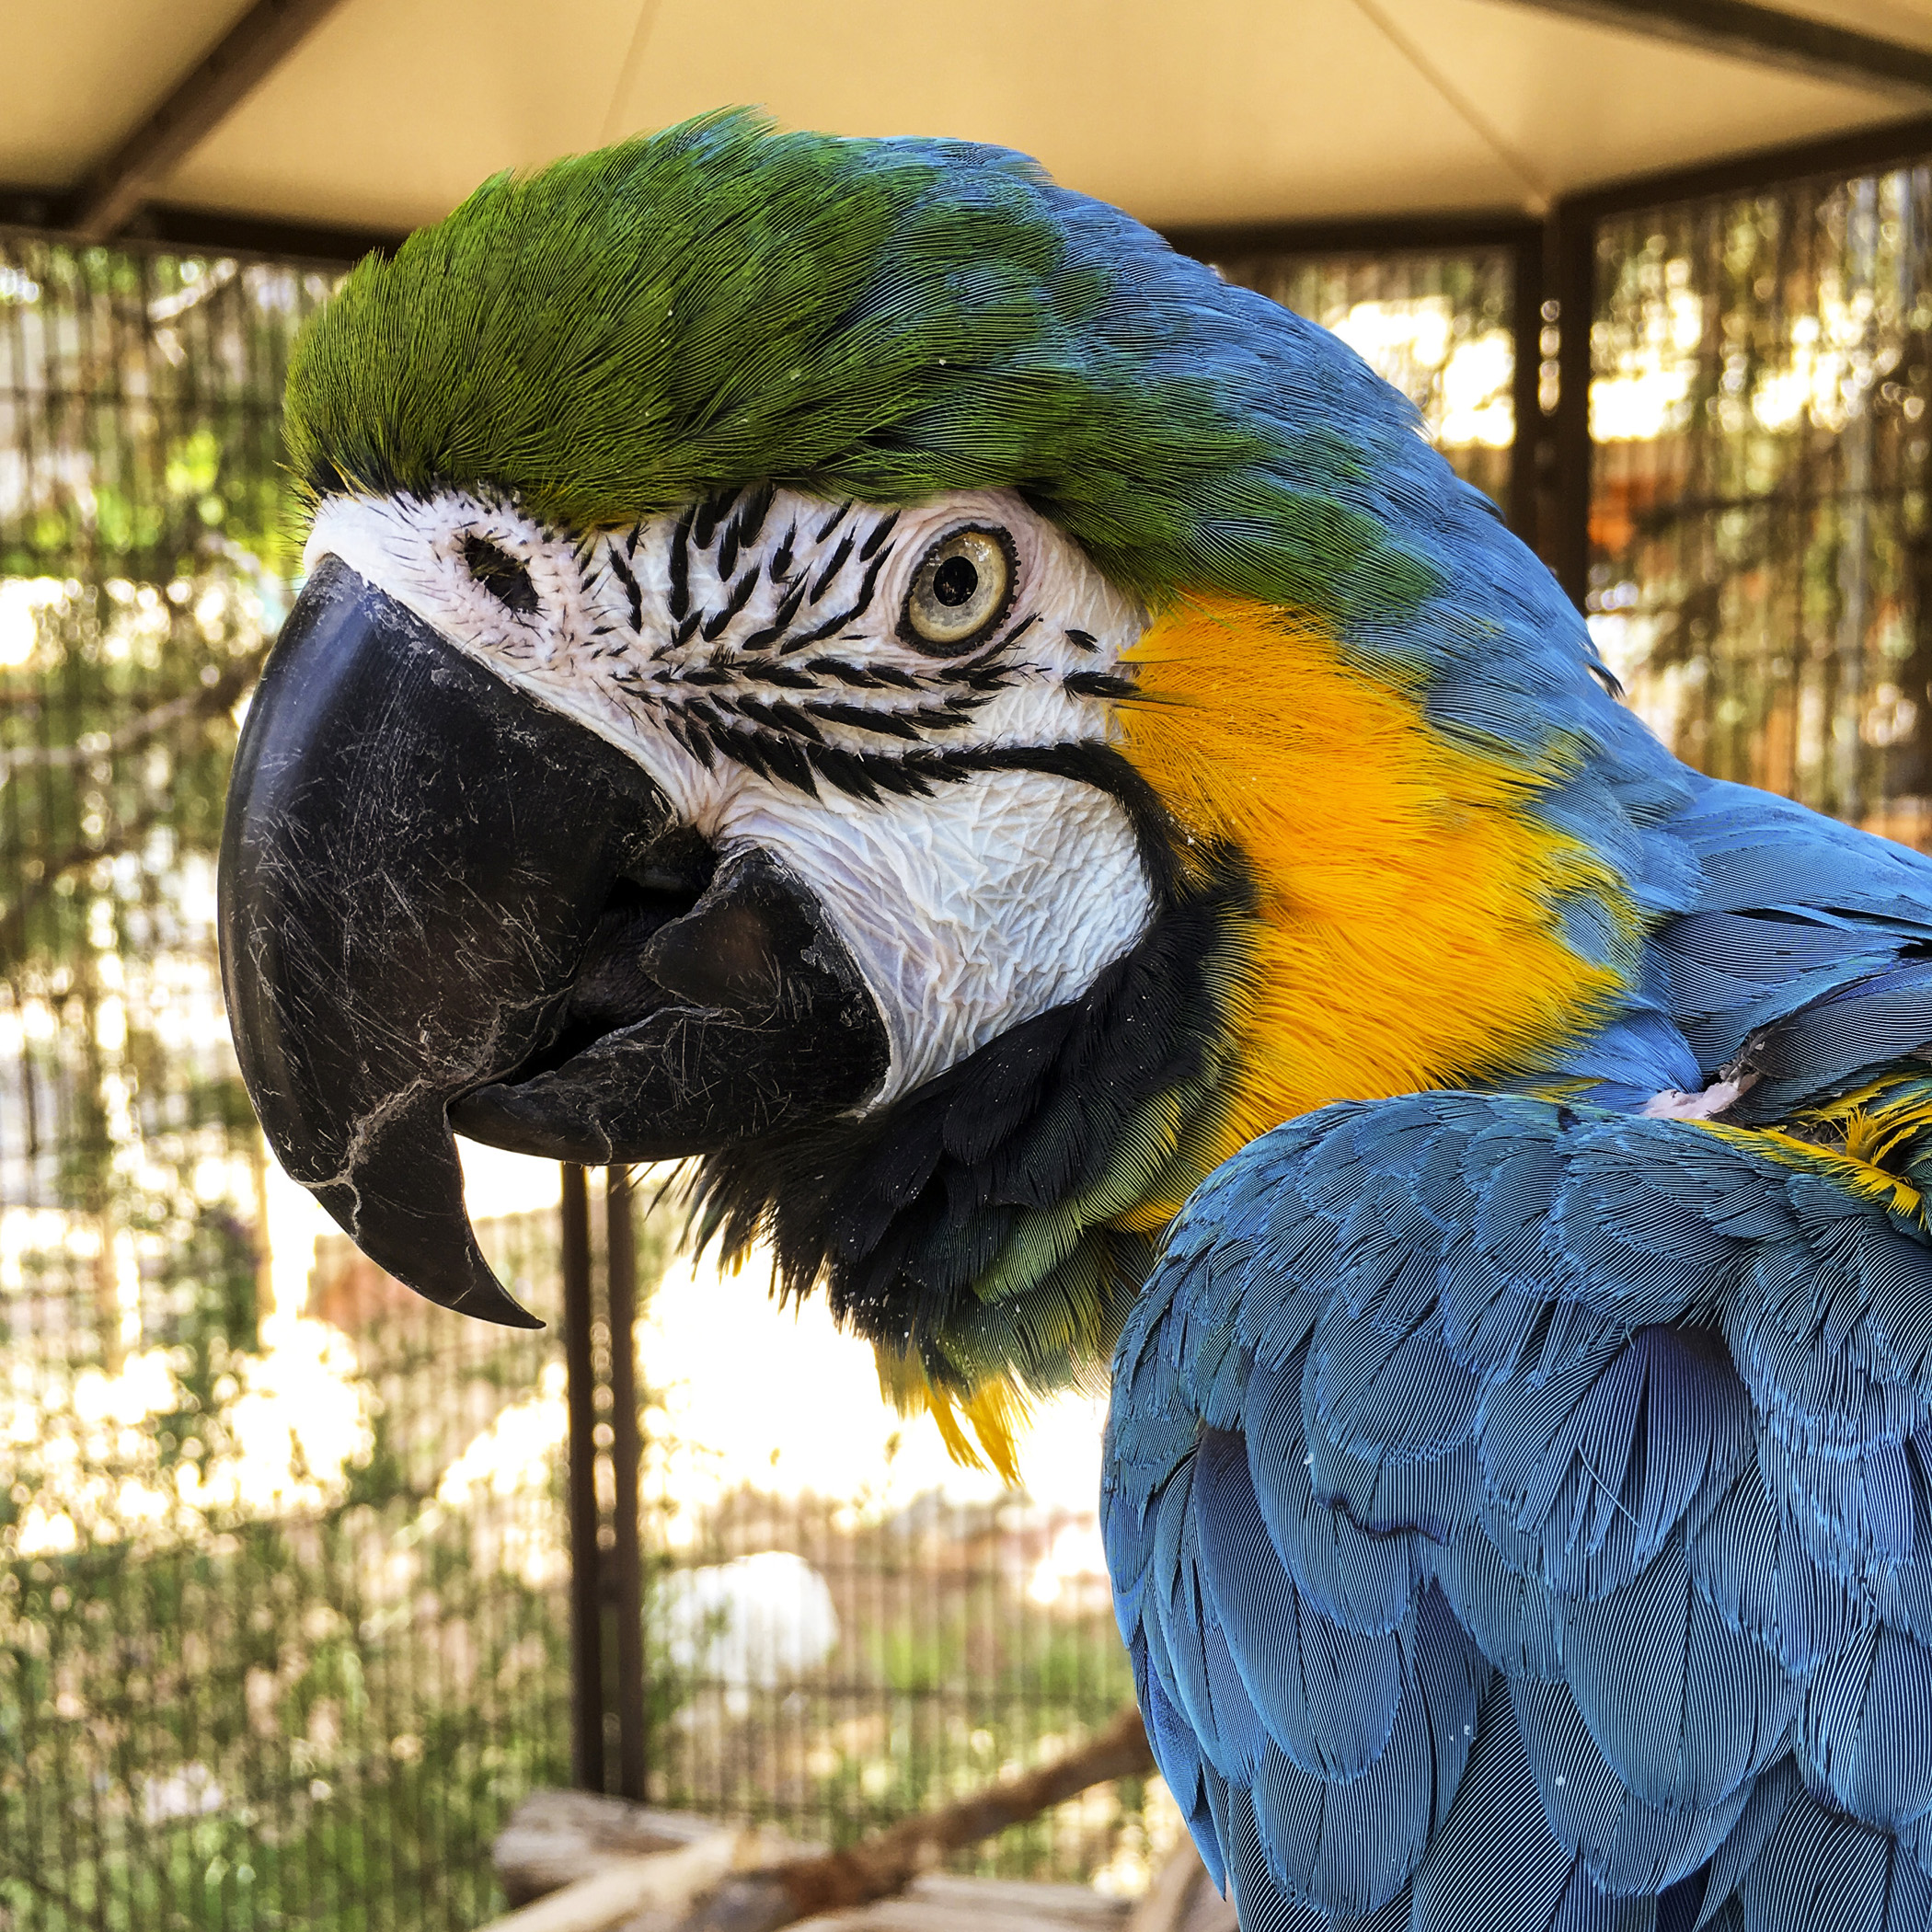  Small parrots, like cockatiels, may live to be 20–30 years old. Larger parrots, like cockatoos or macaws, may live to be 60–80 years old. So, adopting a parrot is truly a lifetime commitment. While adopting a dog or a cat is a commitment to the life